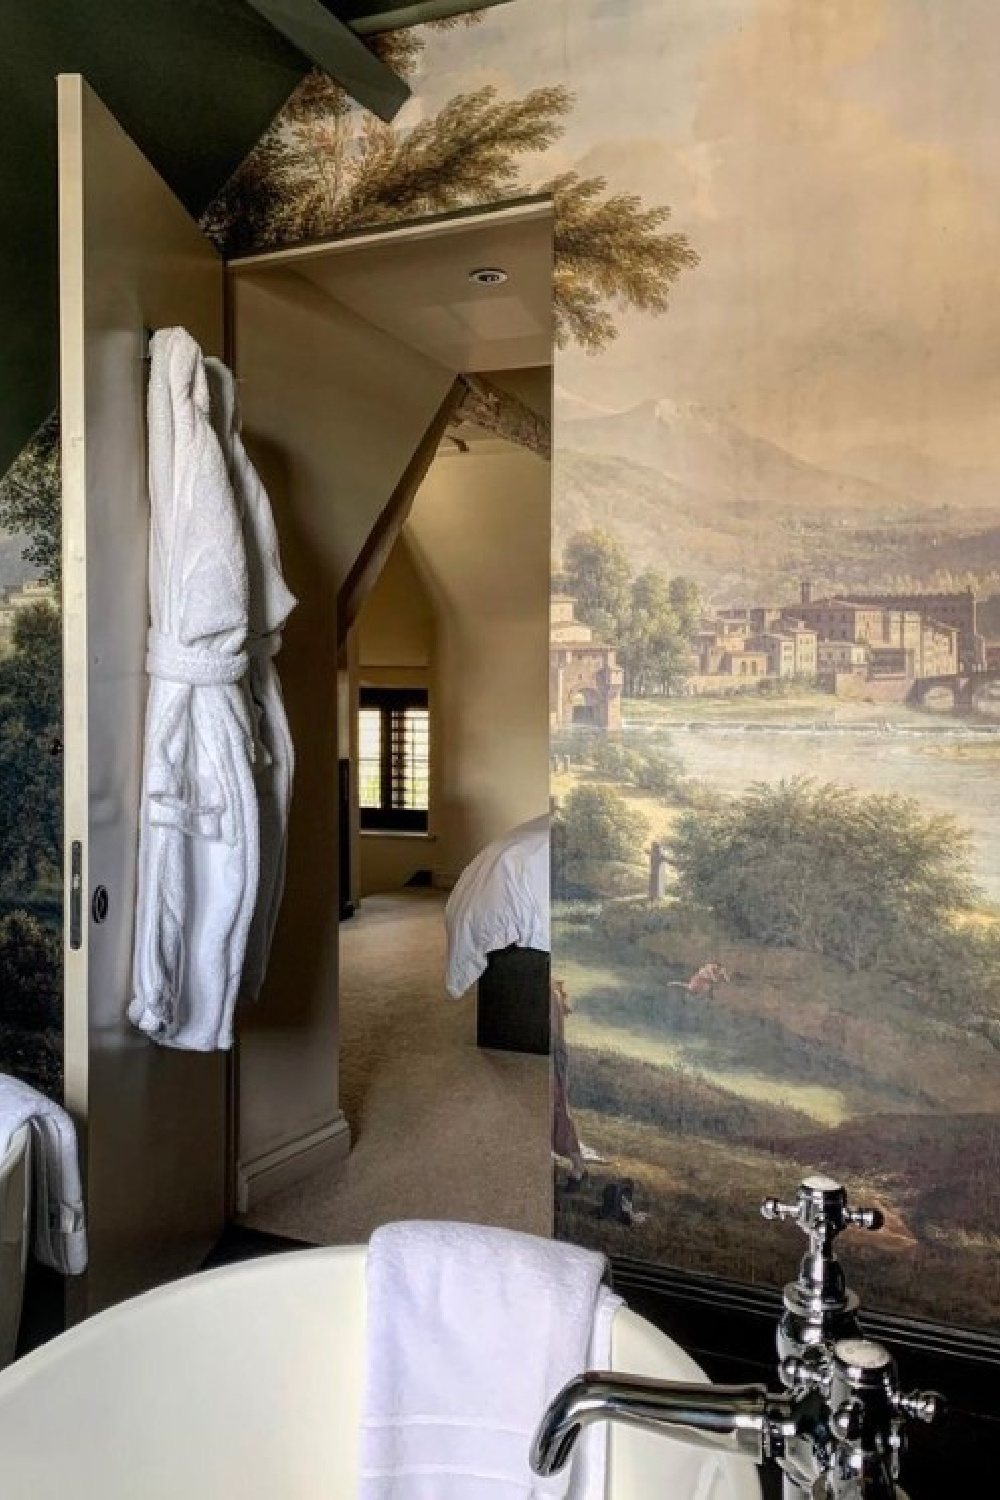 Jib door with scenic mural in a luxurious English country cottage bath - Peony Cottage - a vacation rental in the Cotswolds - @peonycottagecotswolds. #cotswoldscottage #englishcountry